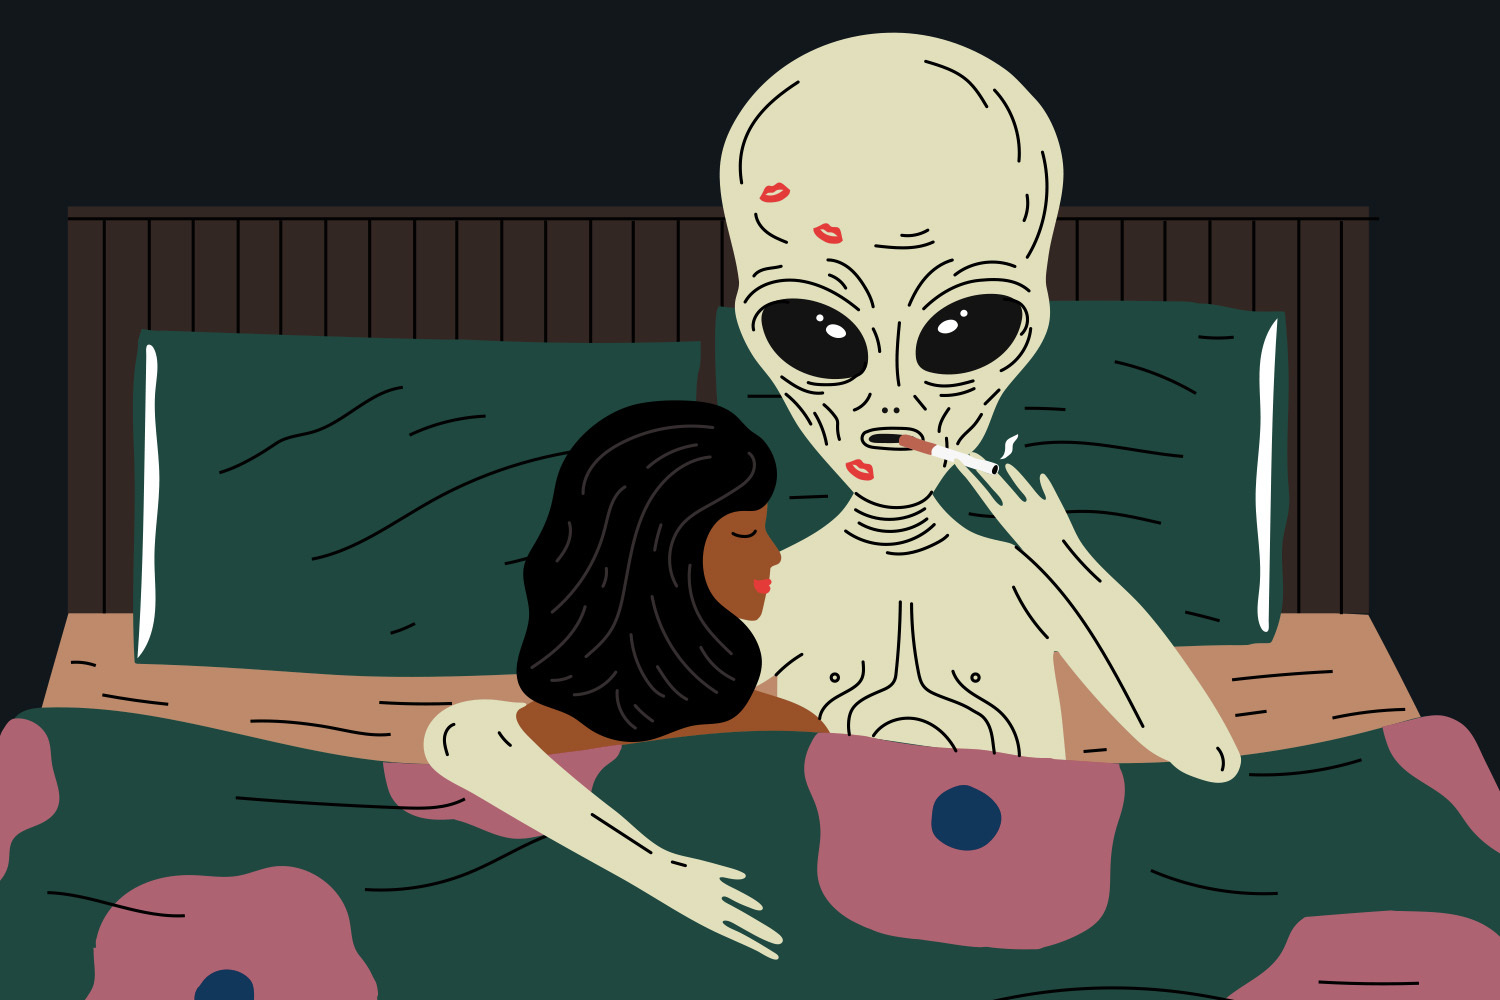 An illustration shows a woman cuddling with an alien in bed. the alien is smoking a cigarette.